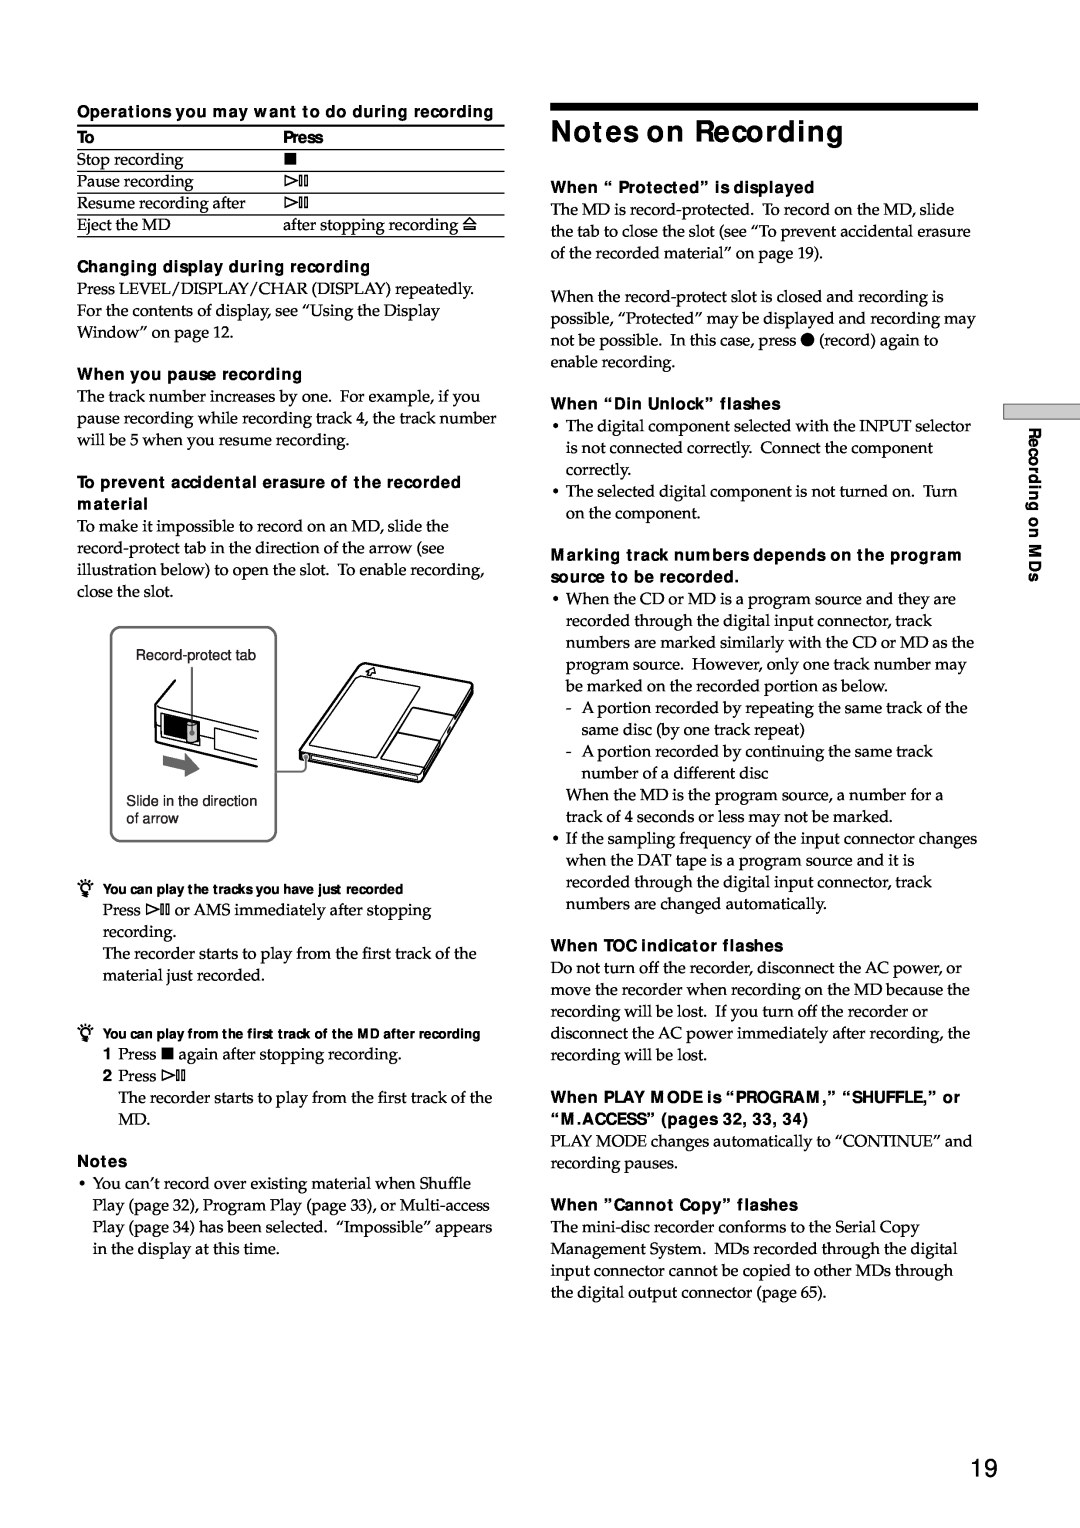 Sony MDS-E12 operating instructions Notes on Recording 